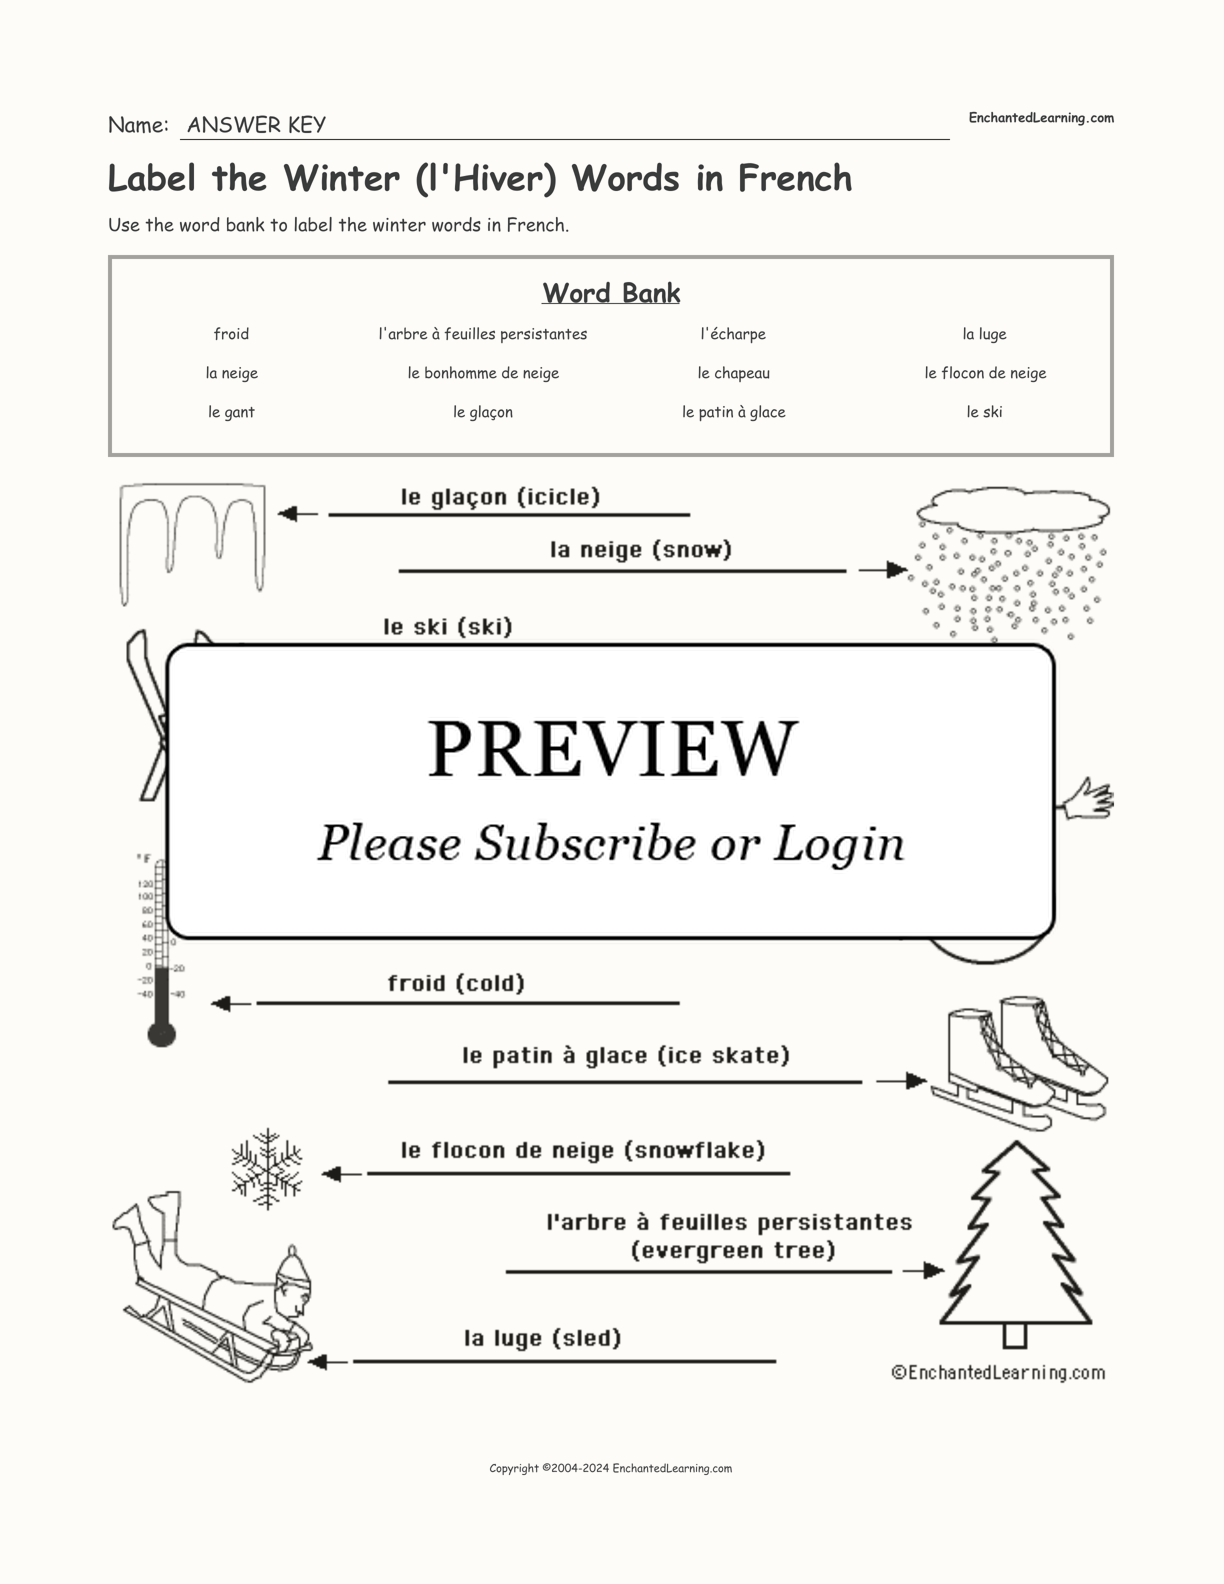 Label the Winter (l'Hiver) Words in French interactive worksheet page 2